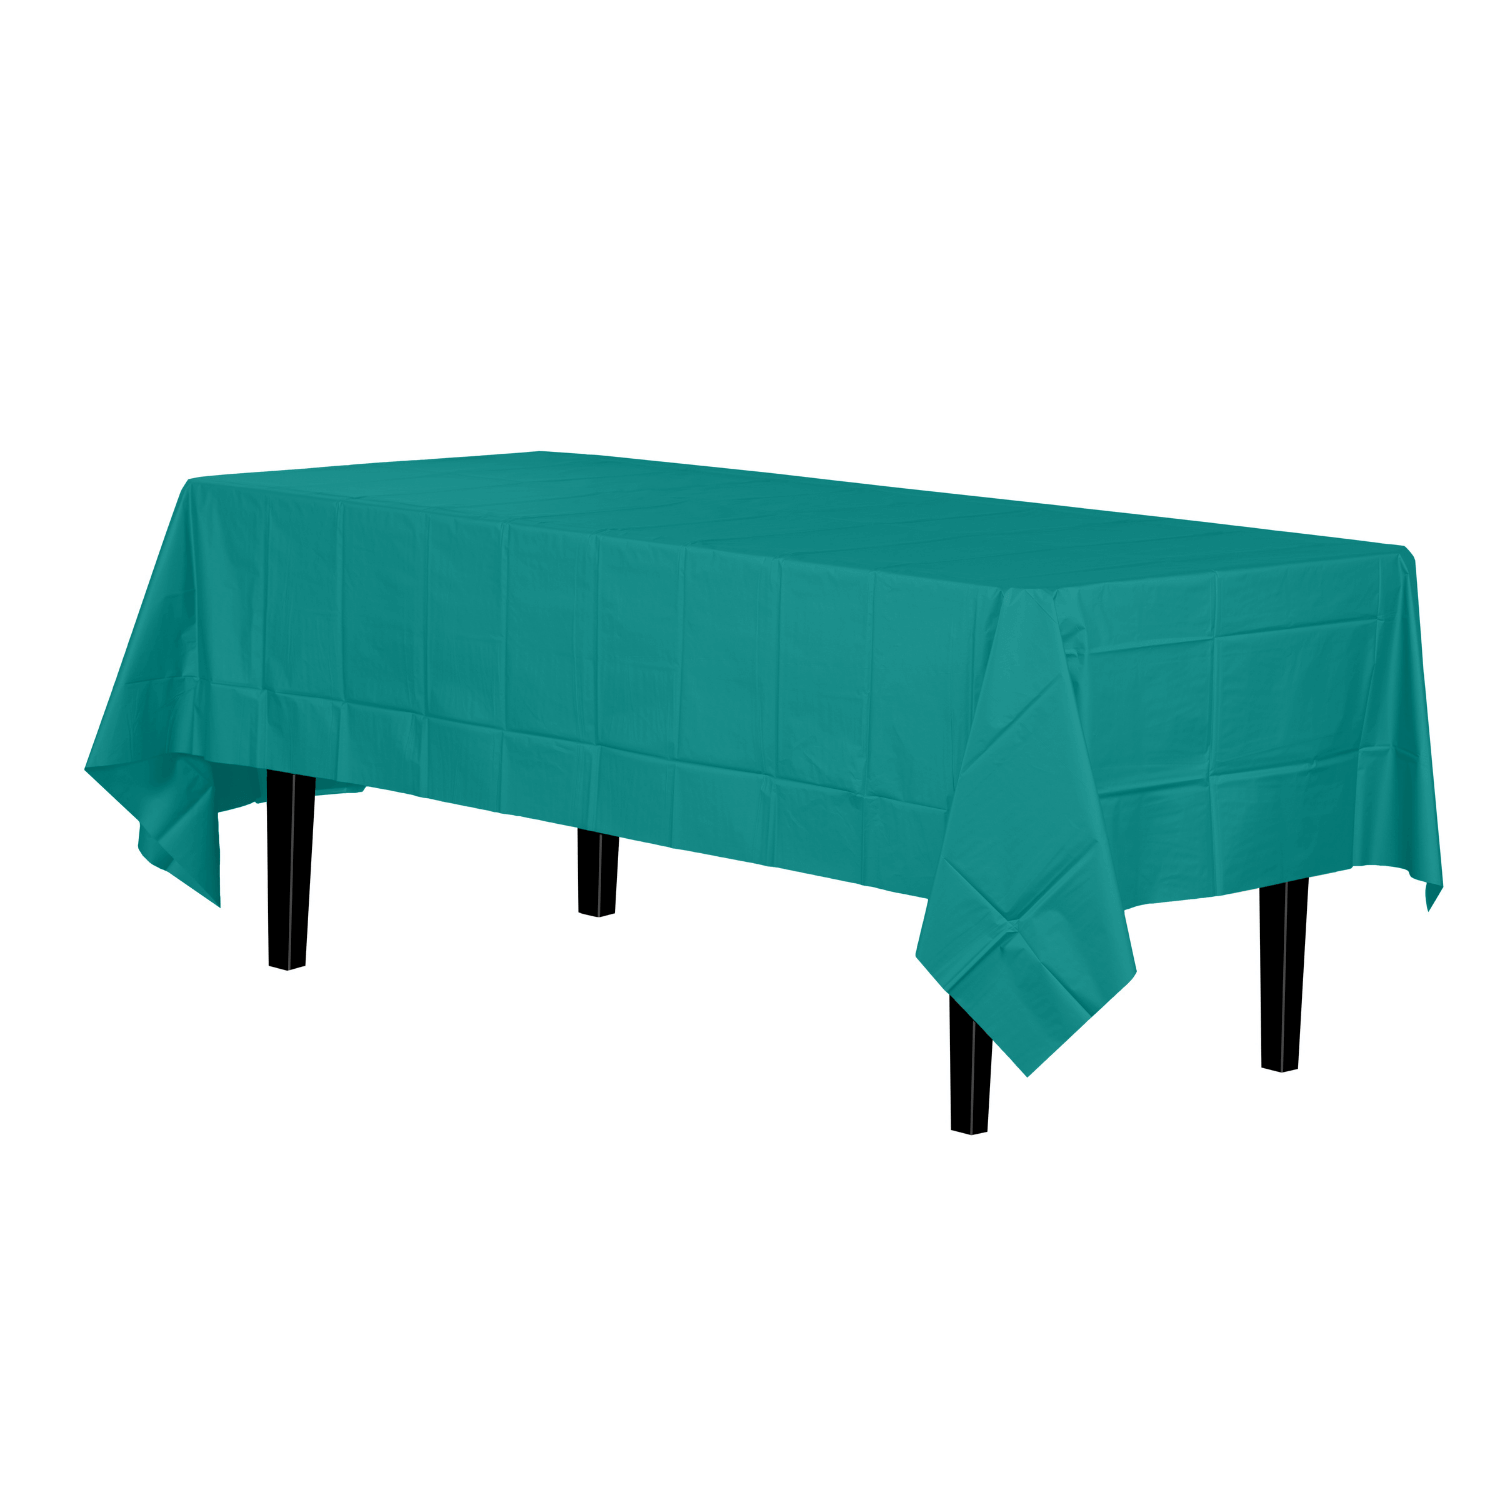 Teal Plastic Tablecloth | 48 Count - Yom Tov Settings